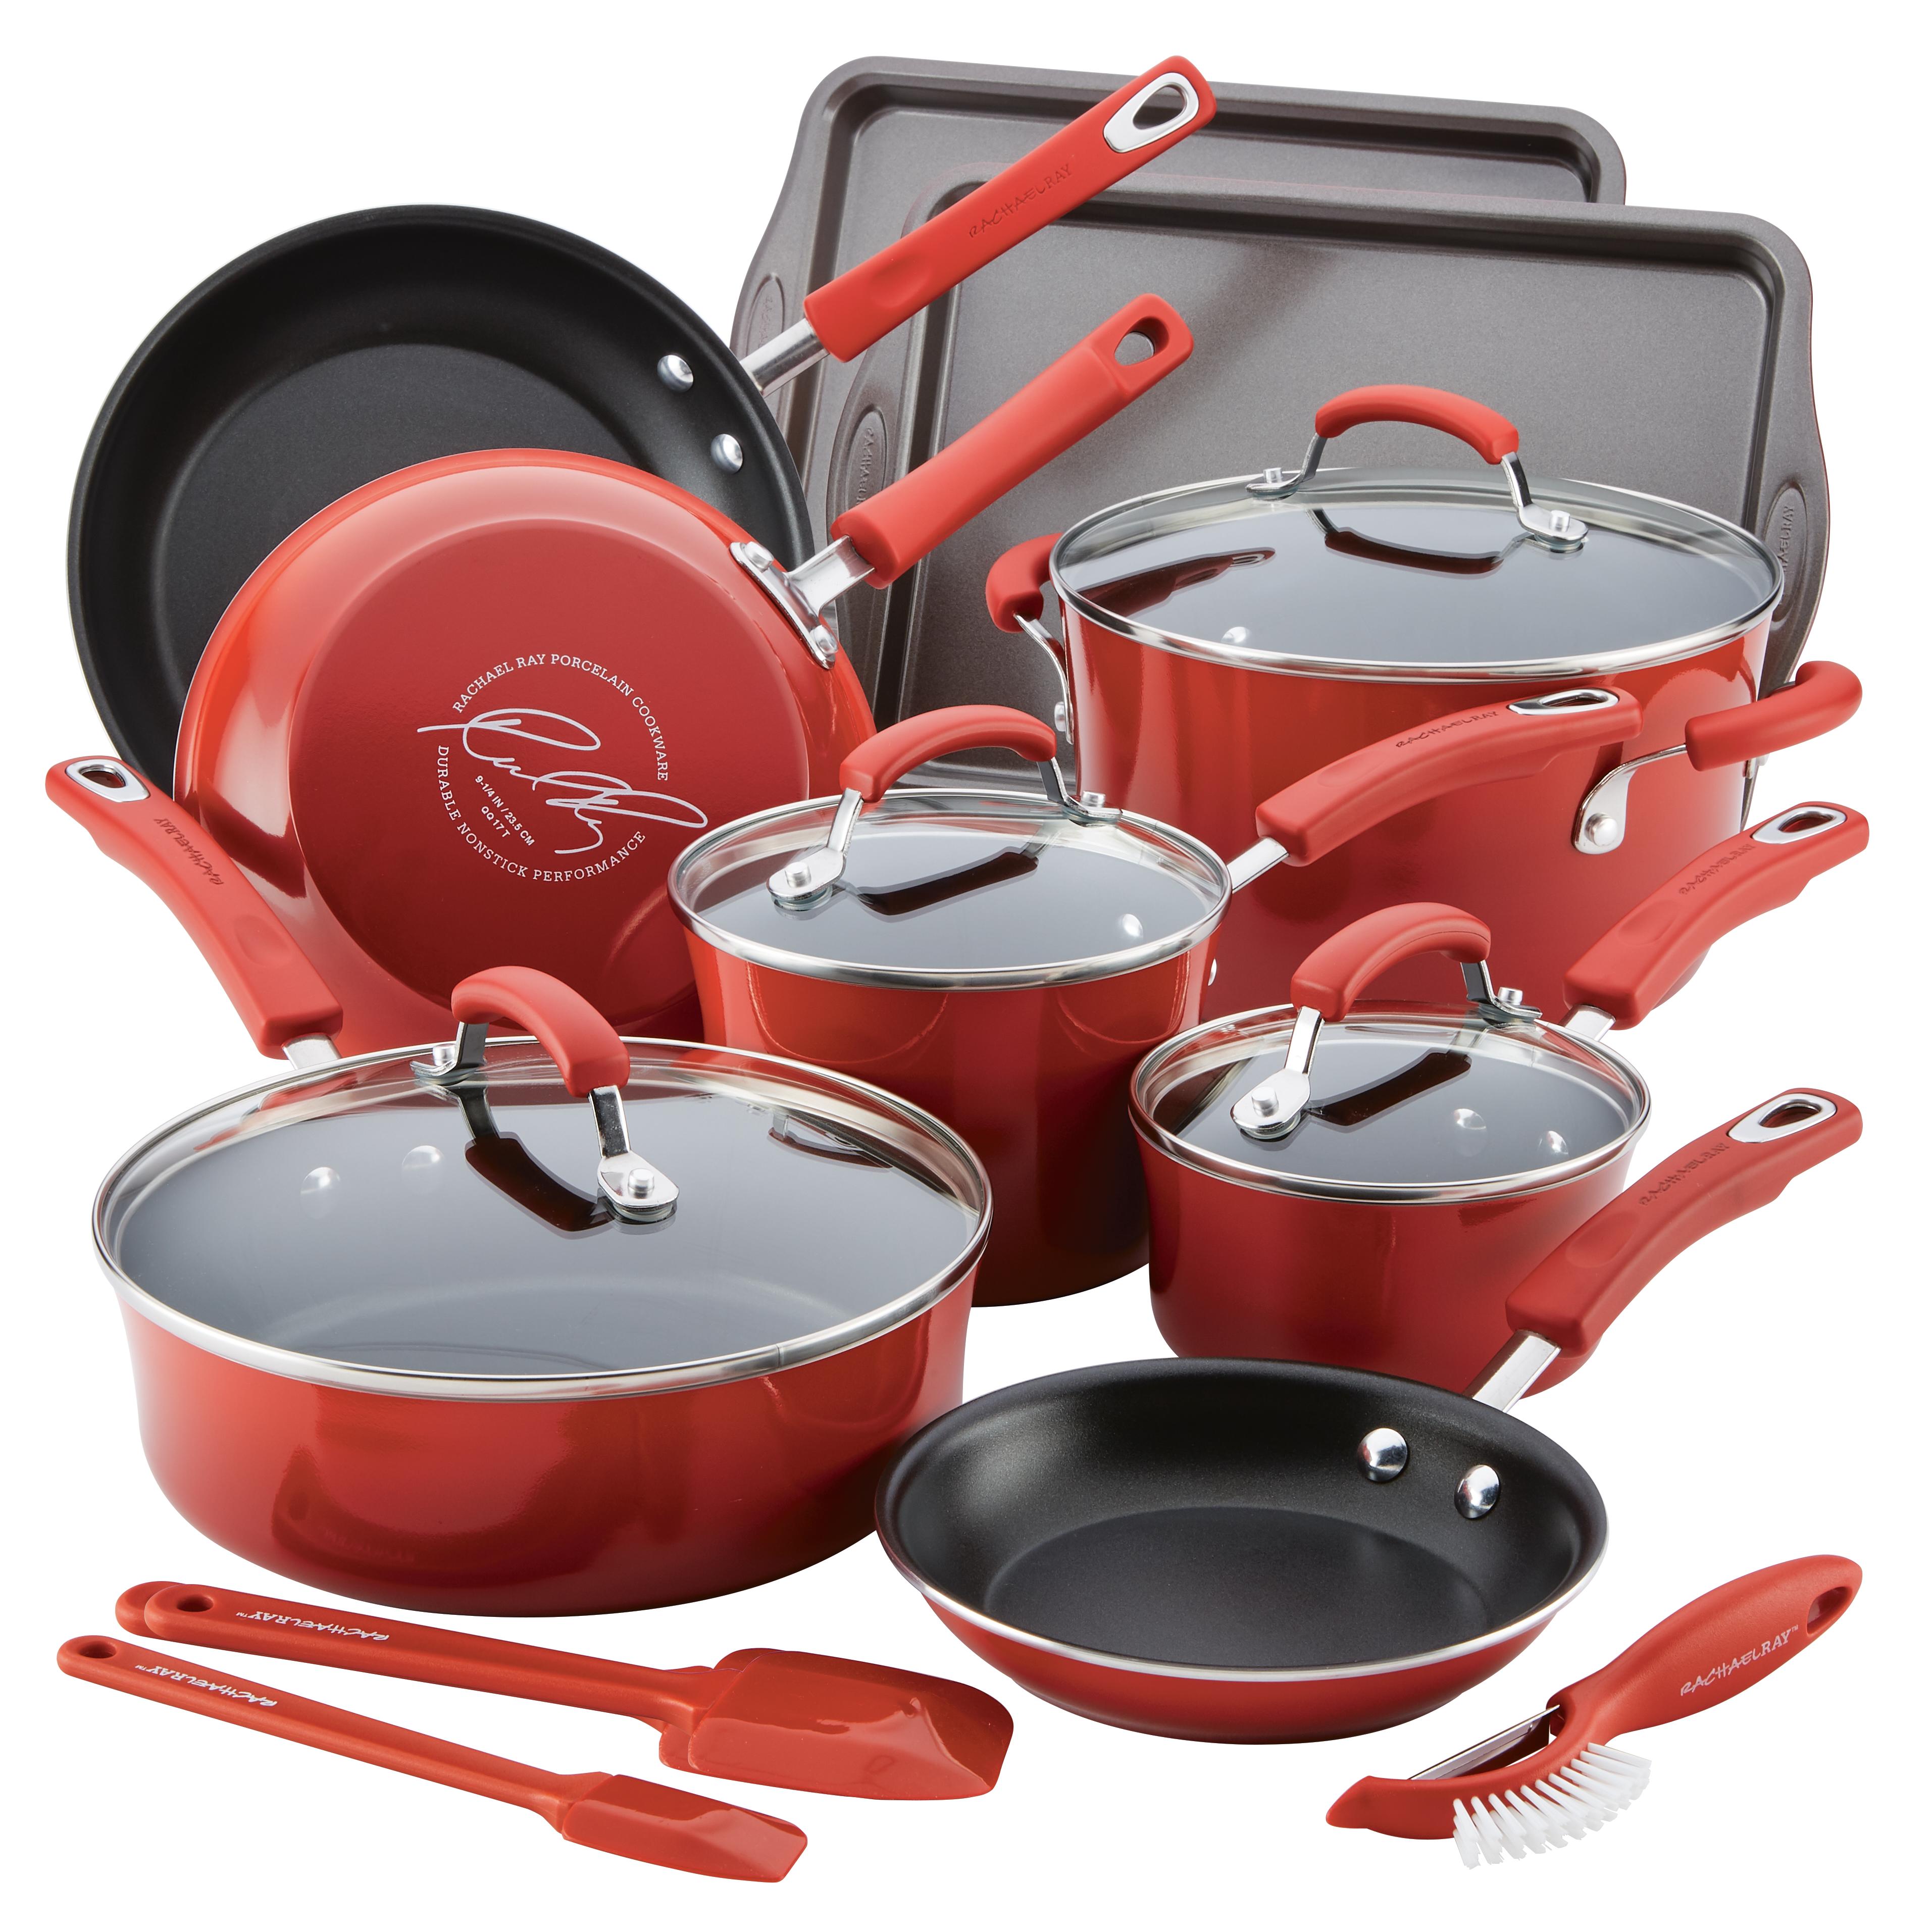 Rachael Ray 16-Piece Classic Brights Porcelain Nonstick Pots and Pans/Cookware Set, Red - image 2 of 6